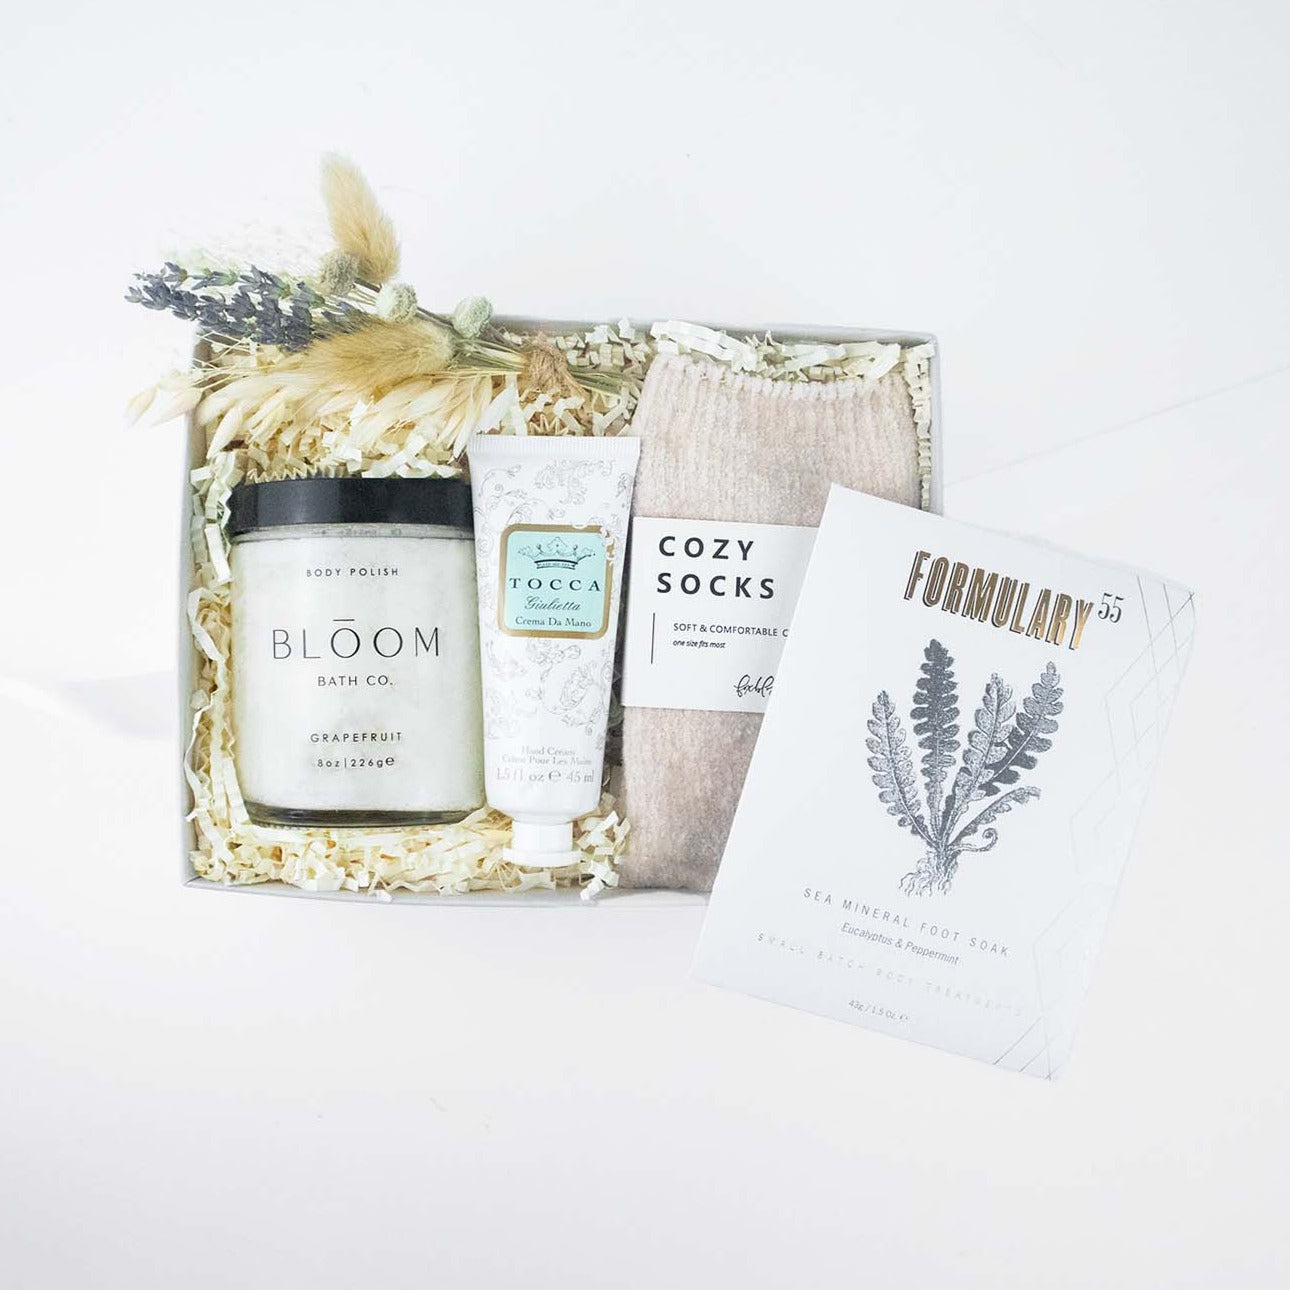 Light grey box containing nude chenille cozy socks,  glass jar of bloom bath co grapefruit body scrub, a dried floral bundle, mini tube of tocca giulietta hand cream with golden floral filigree design, packet of formulary 55 peppermint and eucalyptus sea mineral foot soak.